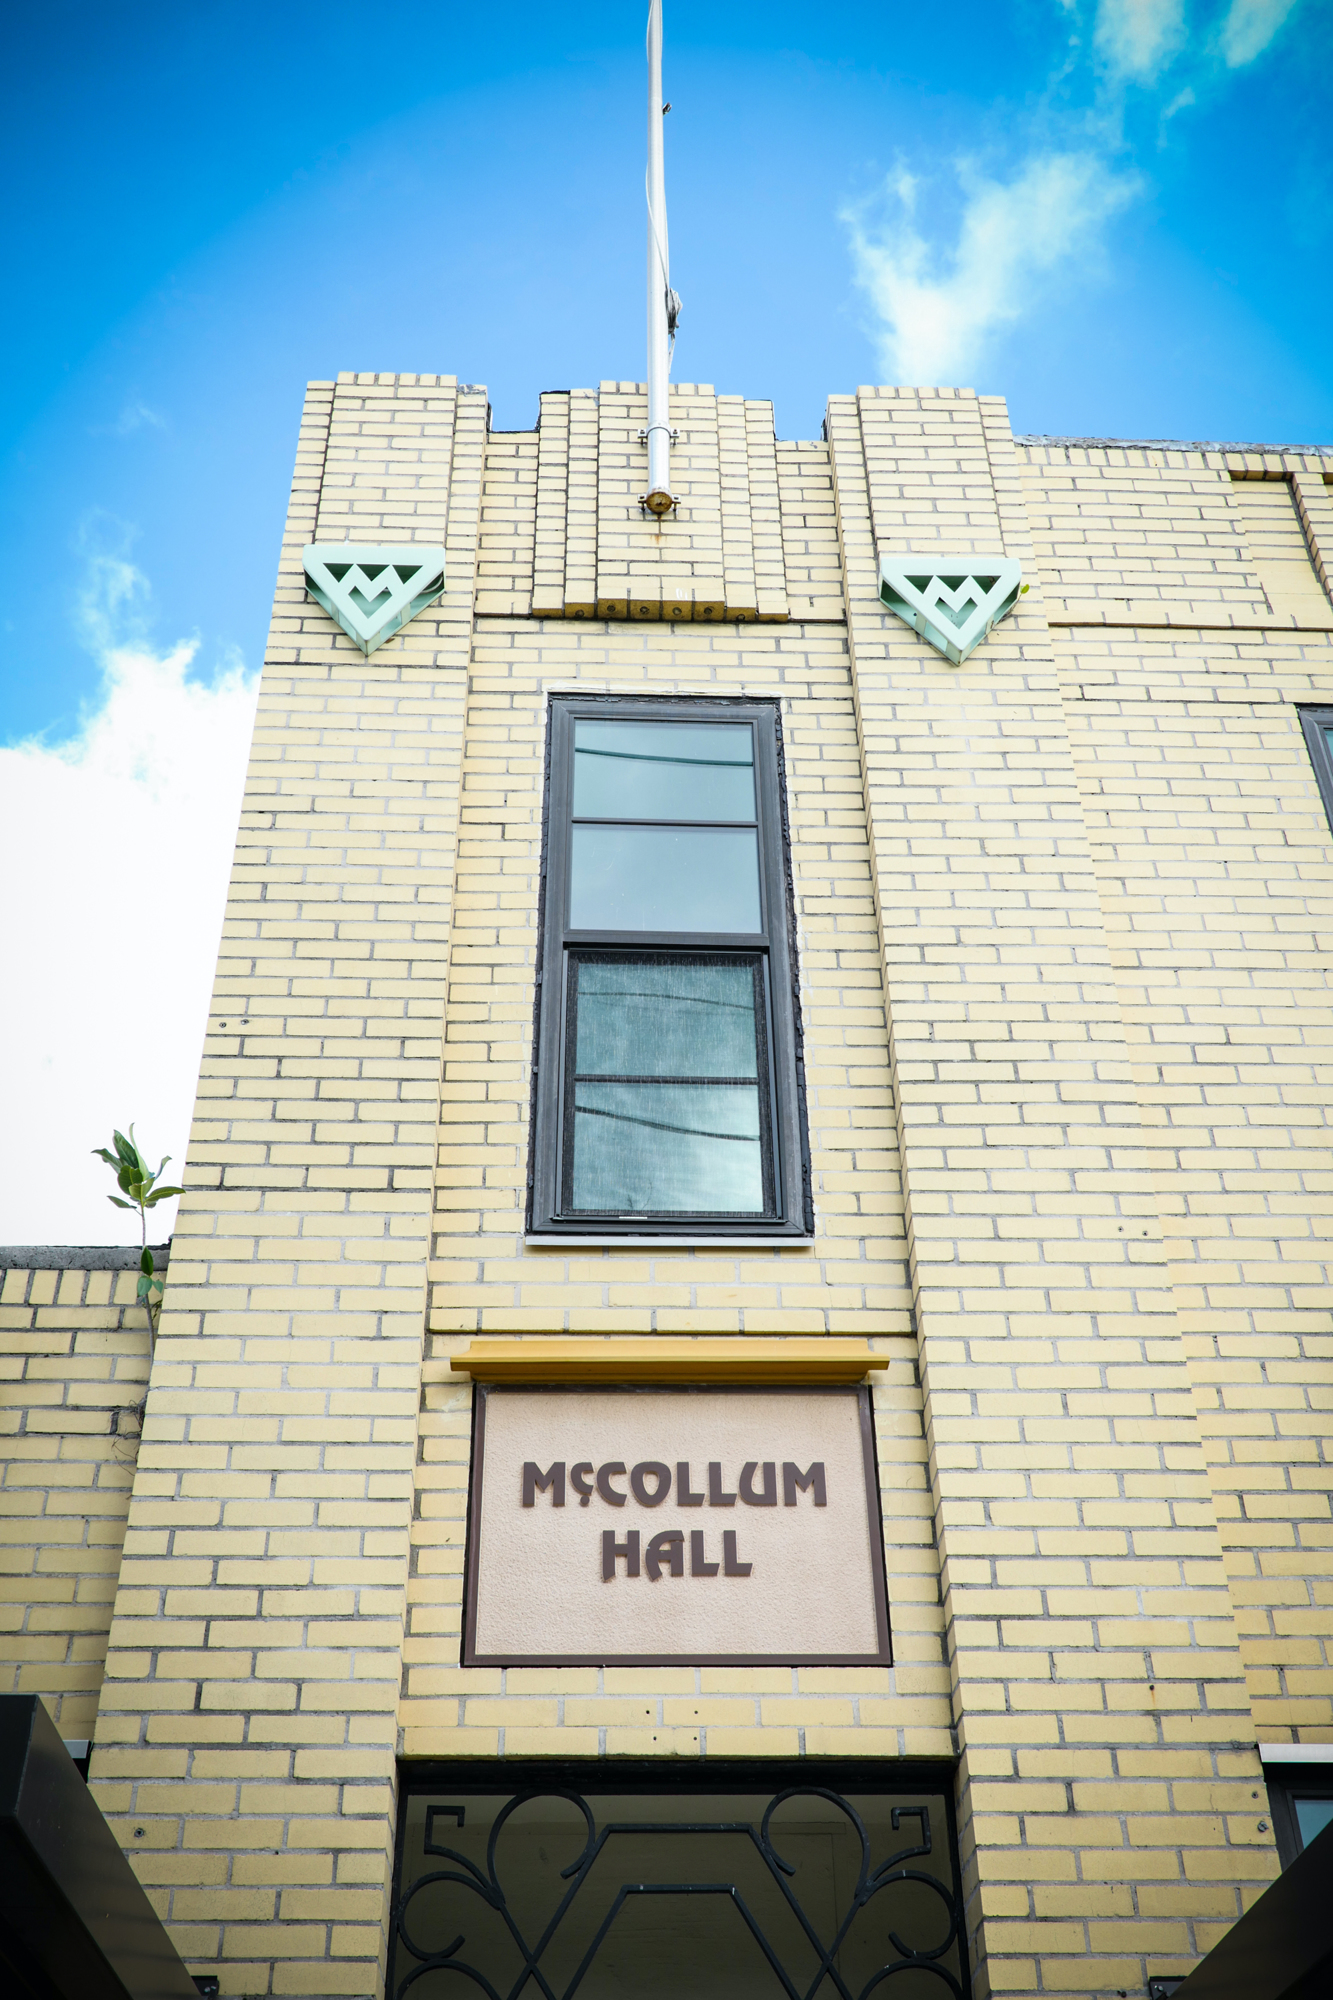 Built in 1938, McCollum Hall was added to the National Register of Historic Places on April 18, 2022. (Photo by Reagan Rule)